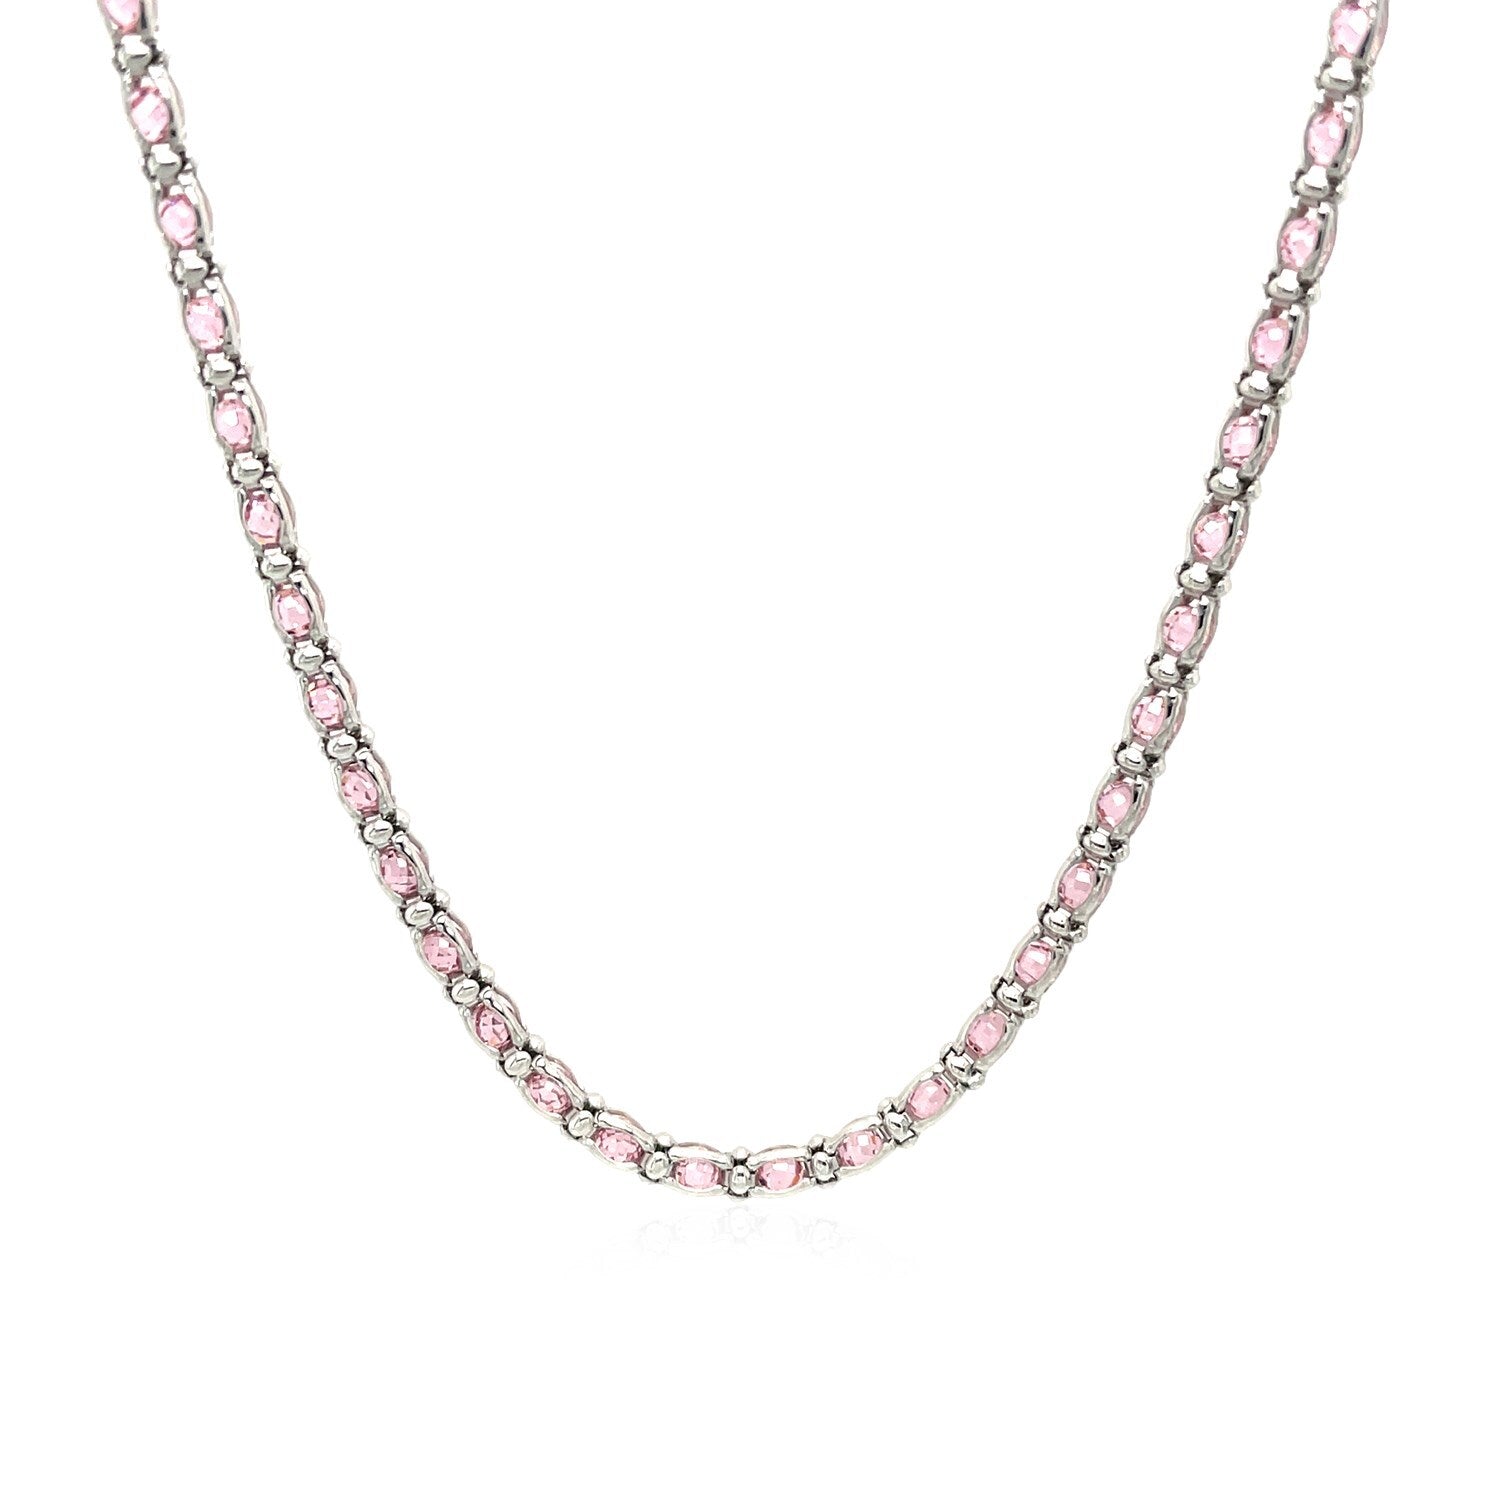 Sterling Silver 18 inch Necklace with Pink Cubic Zirconias, size 18''